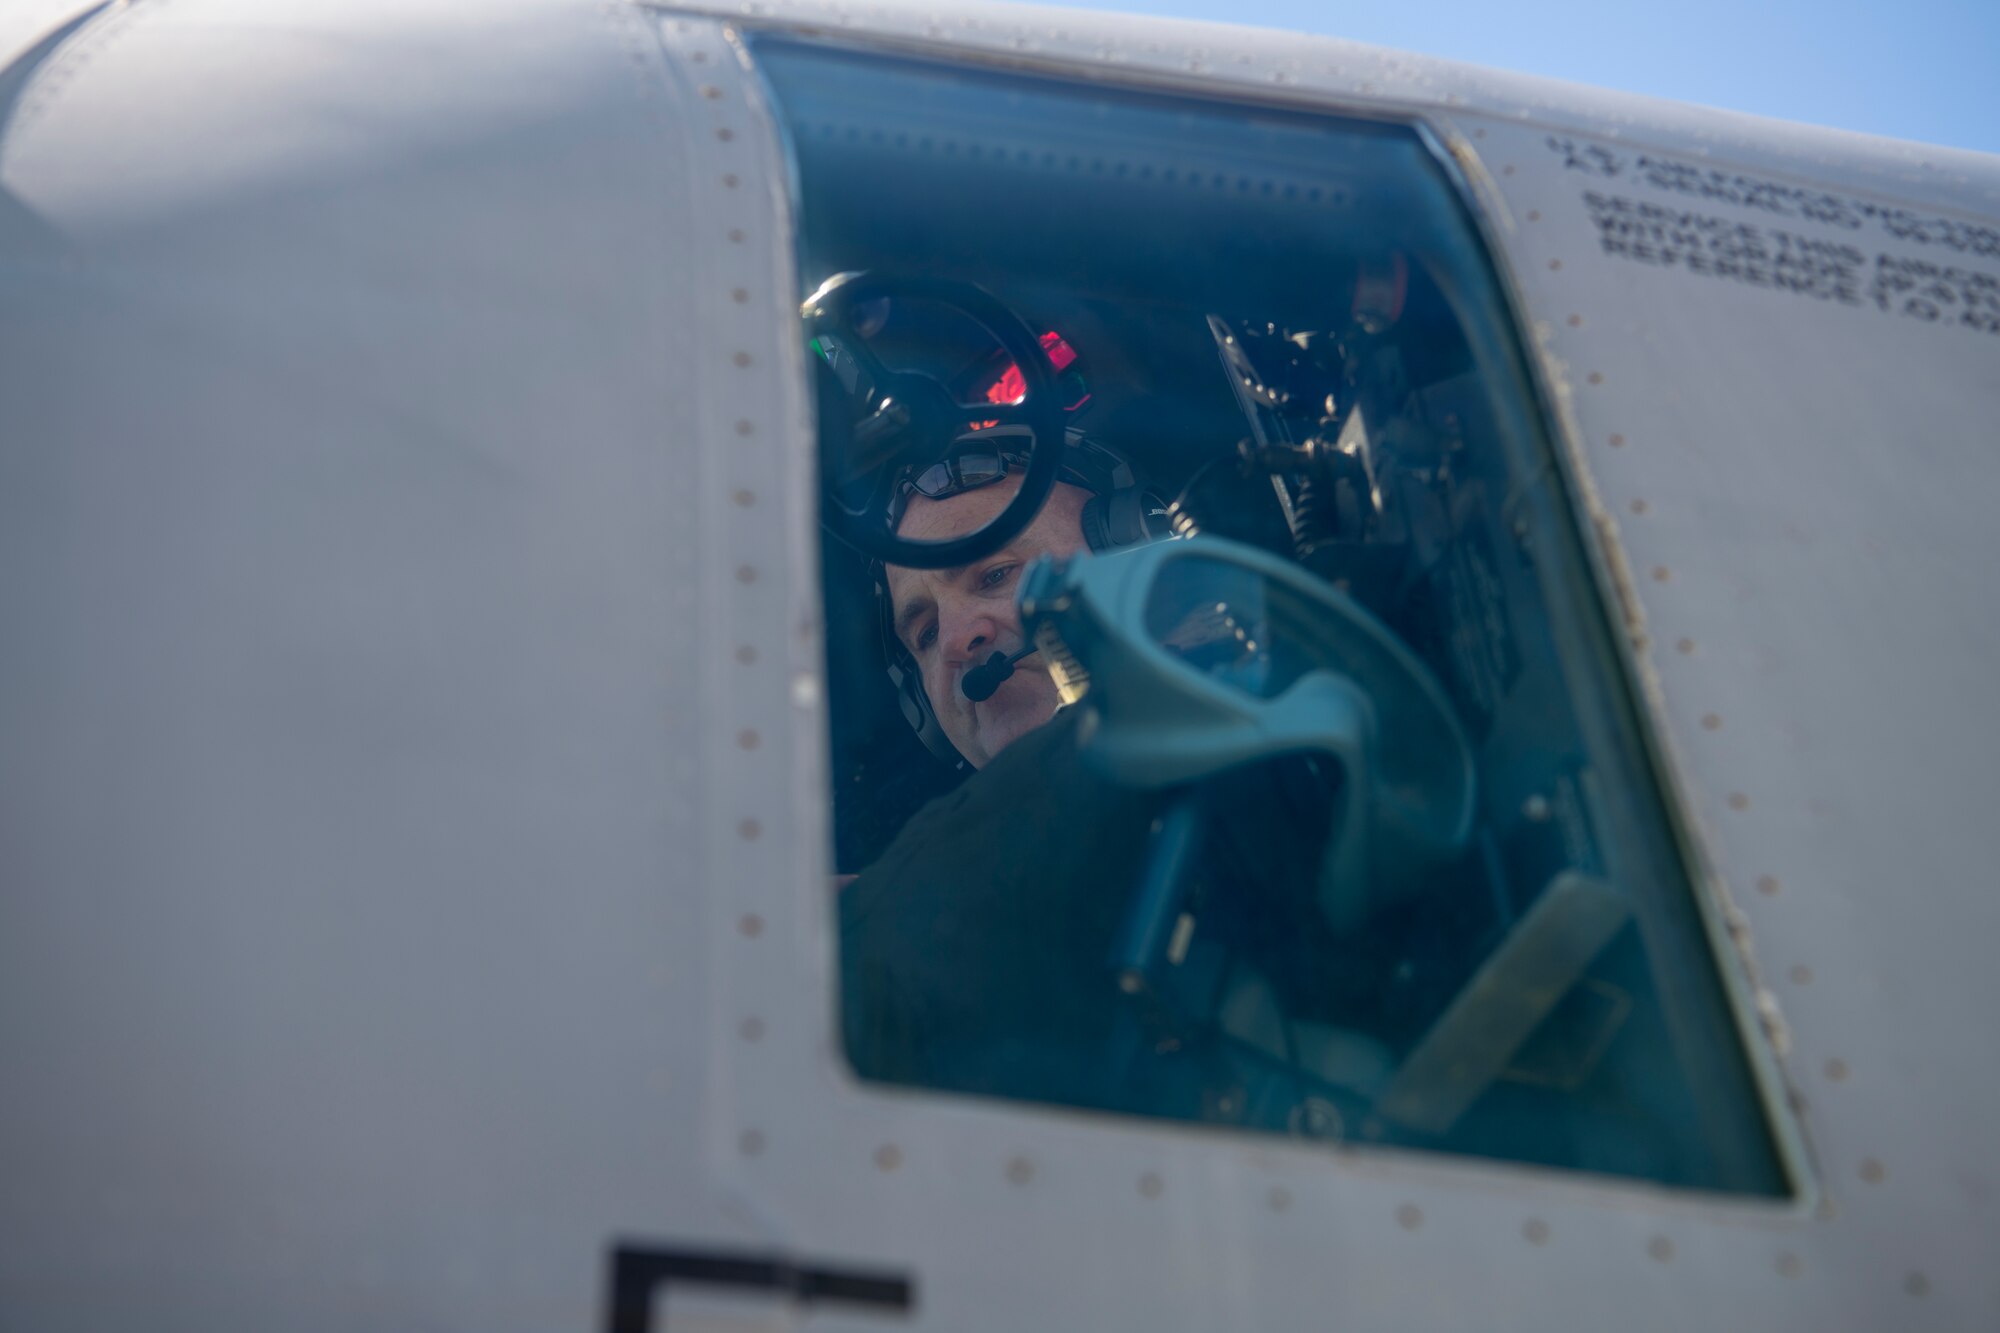 Maj. Kendall Dunn, 53rd Weather Reconnaissance Squadron pilot, conducts the preflight checklist of a WC-130J Super Hercules aircraft June 5, 2020 at Keesler Air Force Base, Mississippi. The Hurricane Hunters were tasked to fly a fixed mission to locate the center of Cristobal and the data gathered was sent to the National Hurricane Center for their weather model forecasts. (U.S. Air Force Photo by Tech. Sgt. Christopher Carranza)